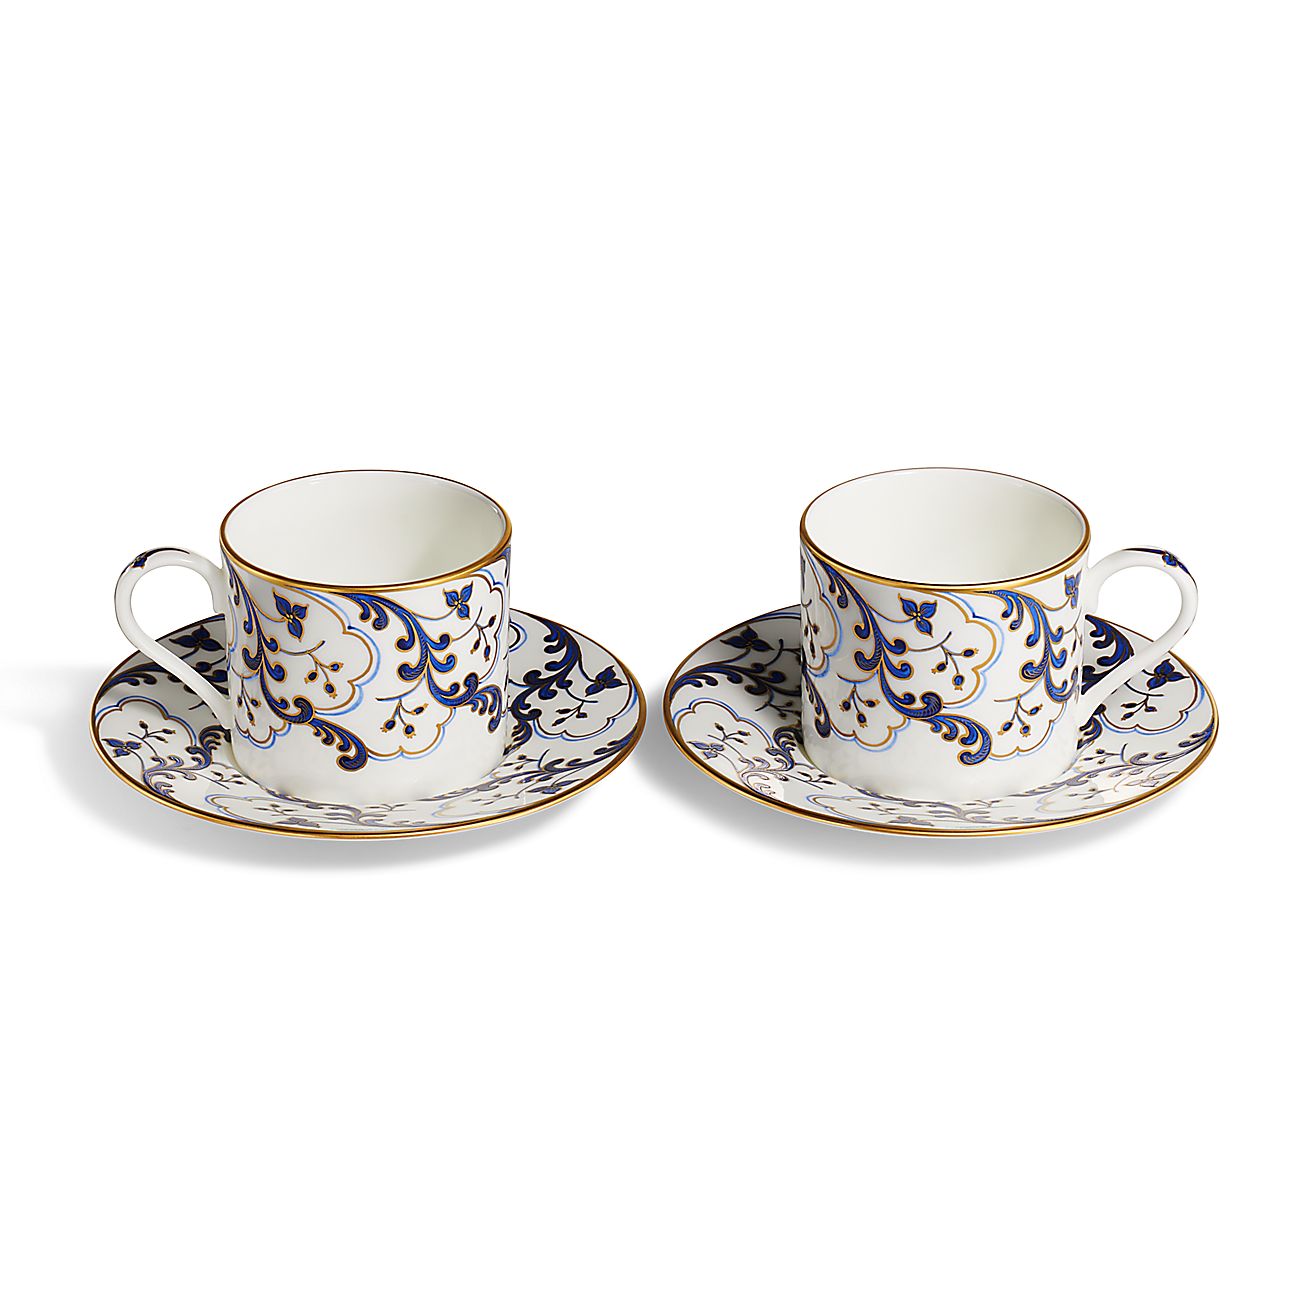 Valse Bleue Teacup and Saucer in Bone China, Set of Two